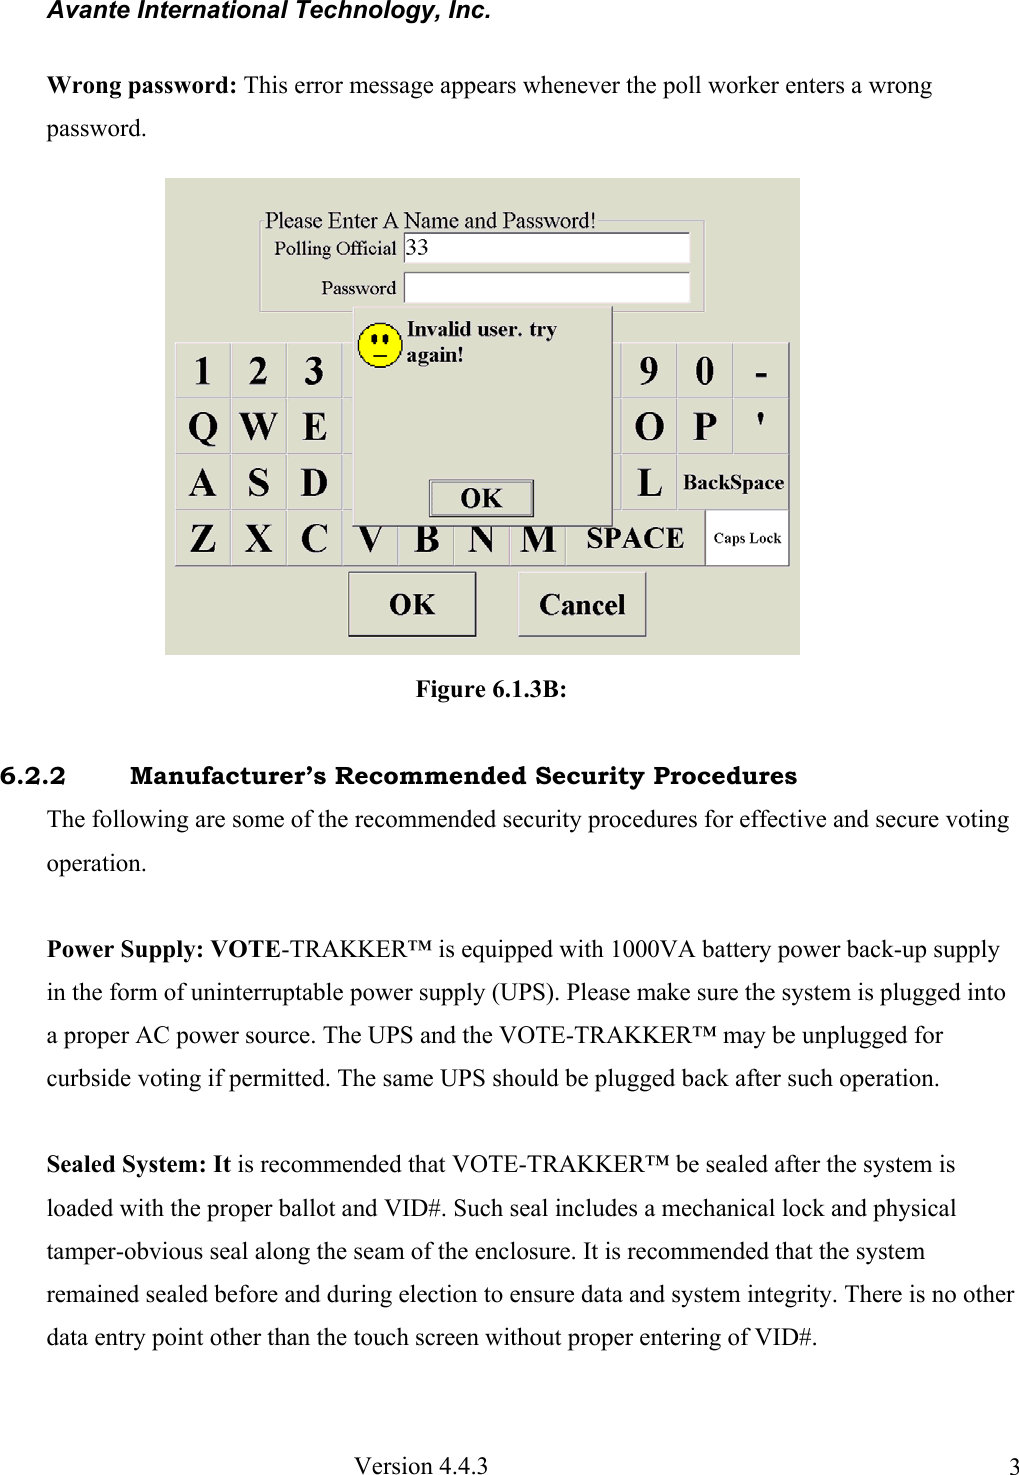 Avante International Technology, Inc.  Version 4.4.3  3Wrong password: This error message appears whenever the poll worker enters a wrong password.                                                Figure 6.1.3B:     6.2.2   Manufacturer’s Recommended Security Procedures The following are some of the recommended security procedures for effective and secure voting operation.  Power Supply: VOTE-TRAKKER™ is equipped with 1000VA battery power back-up supply in the form of uninterruptable power supply (UPS). Please make sure the system is plugged into a proper AC power source. The UPS and the VOTE-TRAKKER™ may be unplugged for curbside voting if permitted. The same UPS should be plugged back after such operation.  Sealed System: It is recommended that VOTE-TRAKKER™ be sealed after the system is loaded with the proper ballot and VID#. Such seal includes a mechanical lock and physical tamper-obvious seal along the seam of the enclosure. It is recommended that the system remained sealed before and during election to ensure data and system integrity. There is no other data entry point other than the touch screen without proper entering of VID#. 